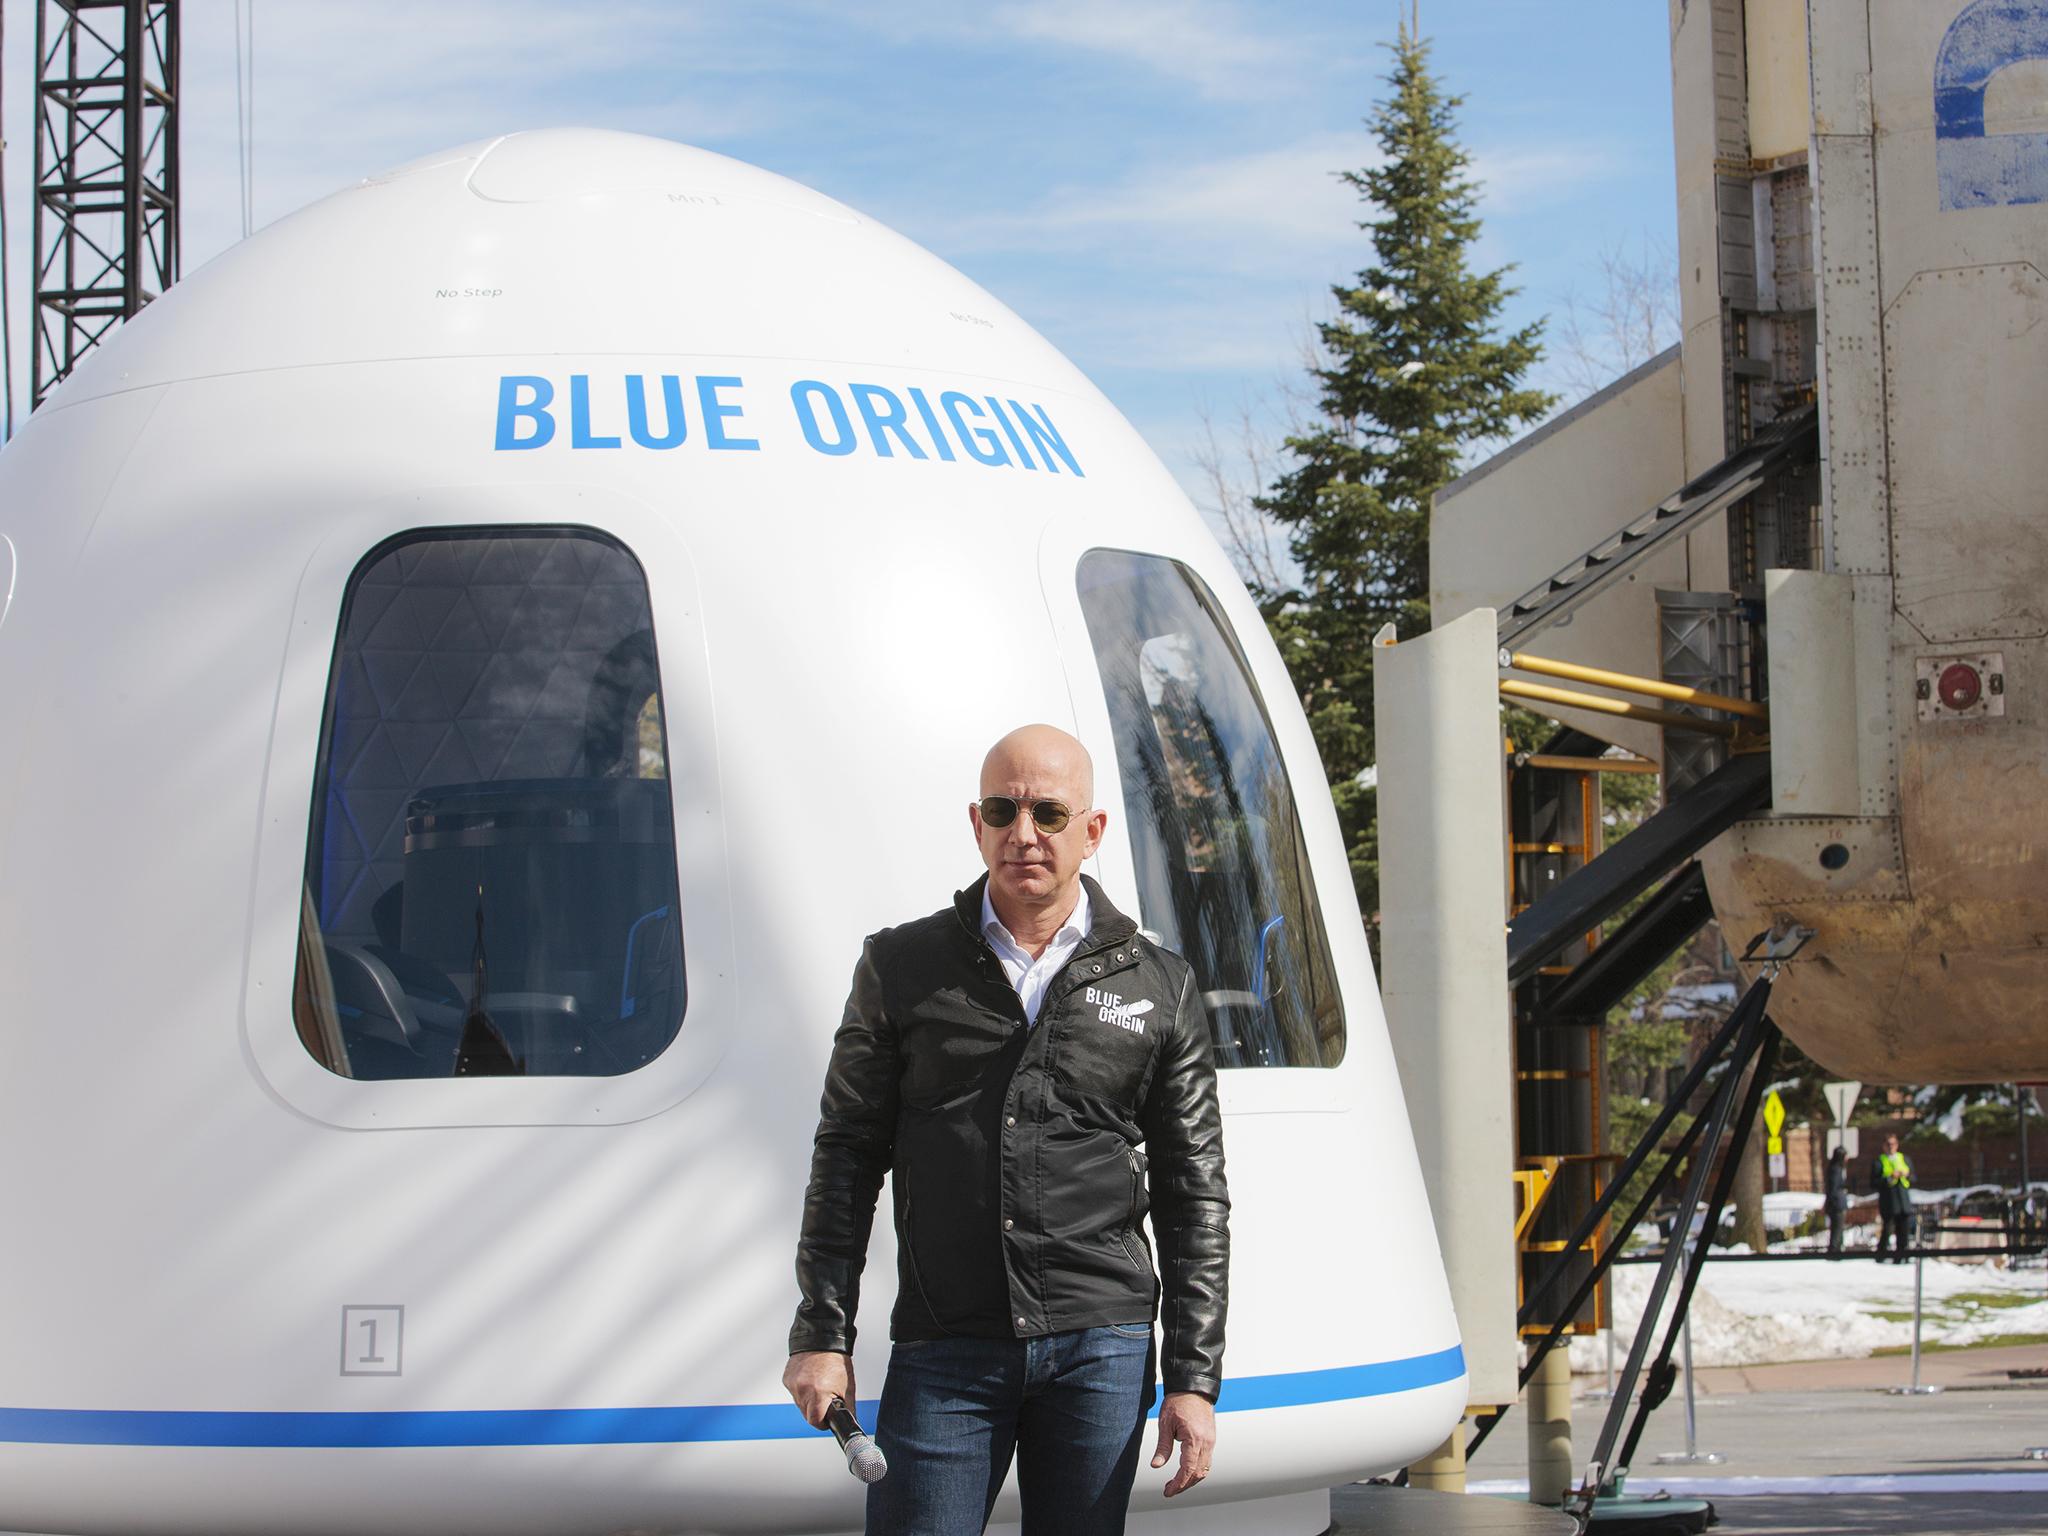 Star man: Bezos has been reinvesting money he made at Amazon since he started his space exploration company Blue Origin more than a decade ago